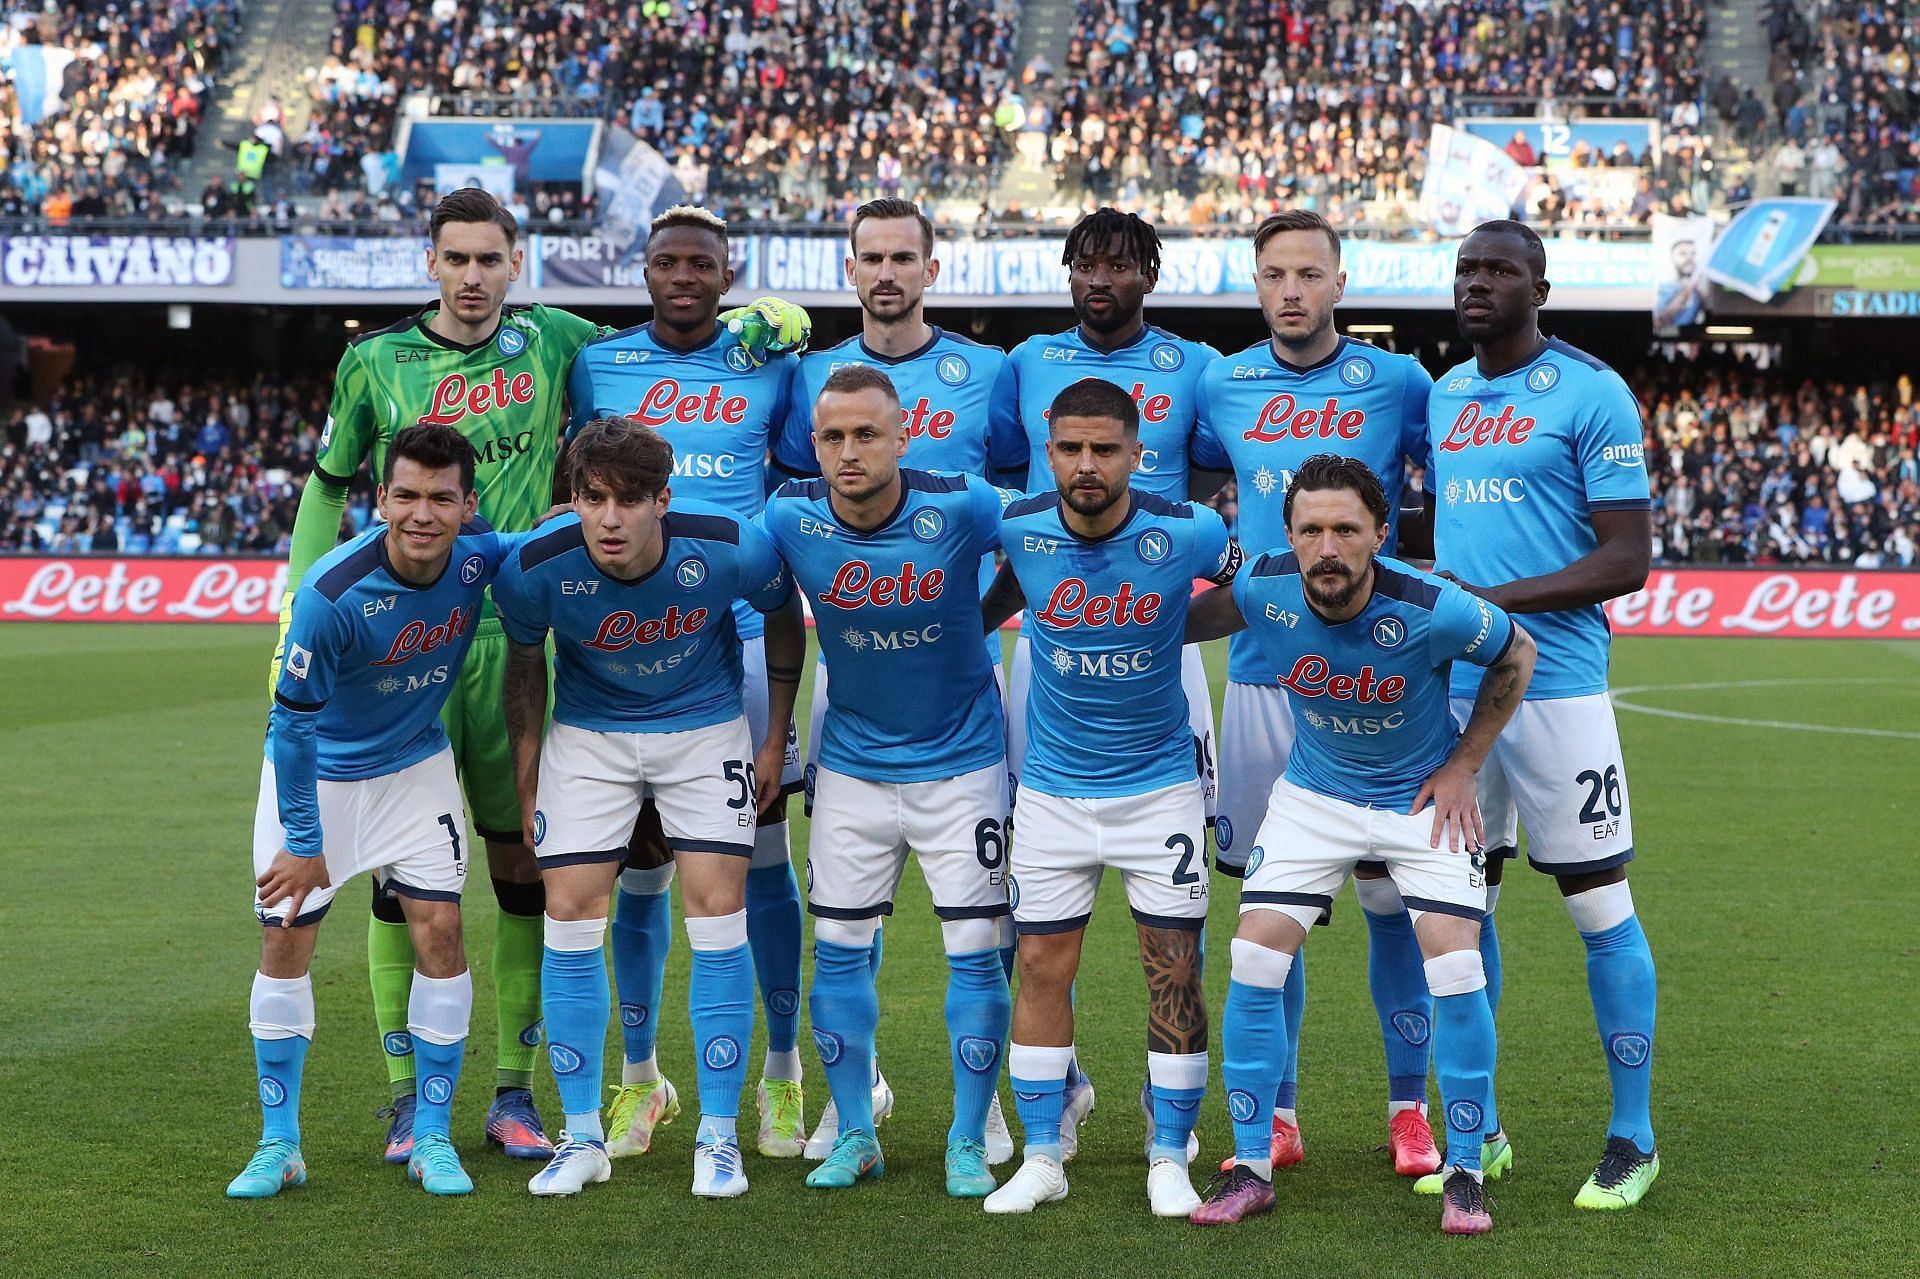 Napoli play Empoli on Sunday in Serie A